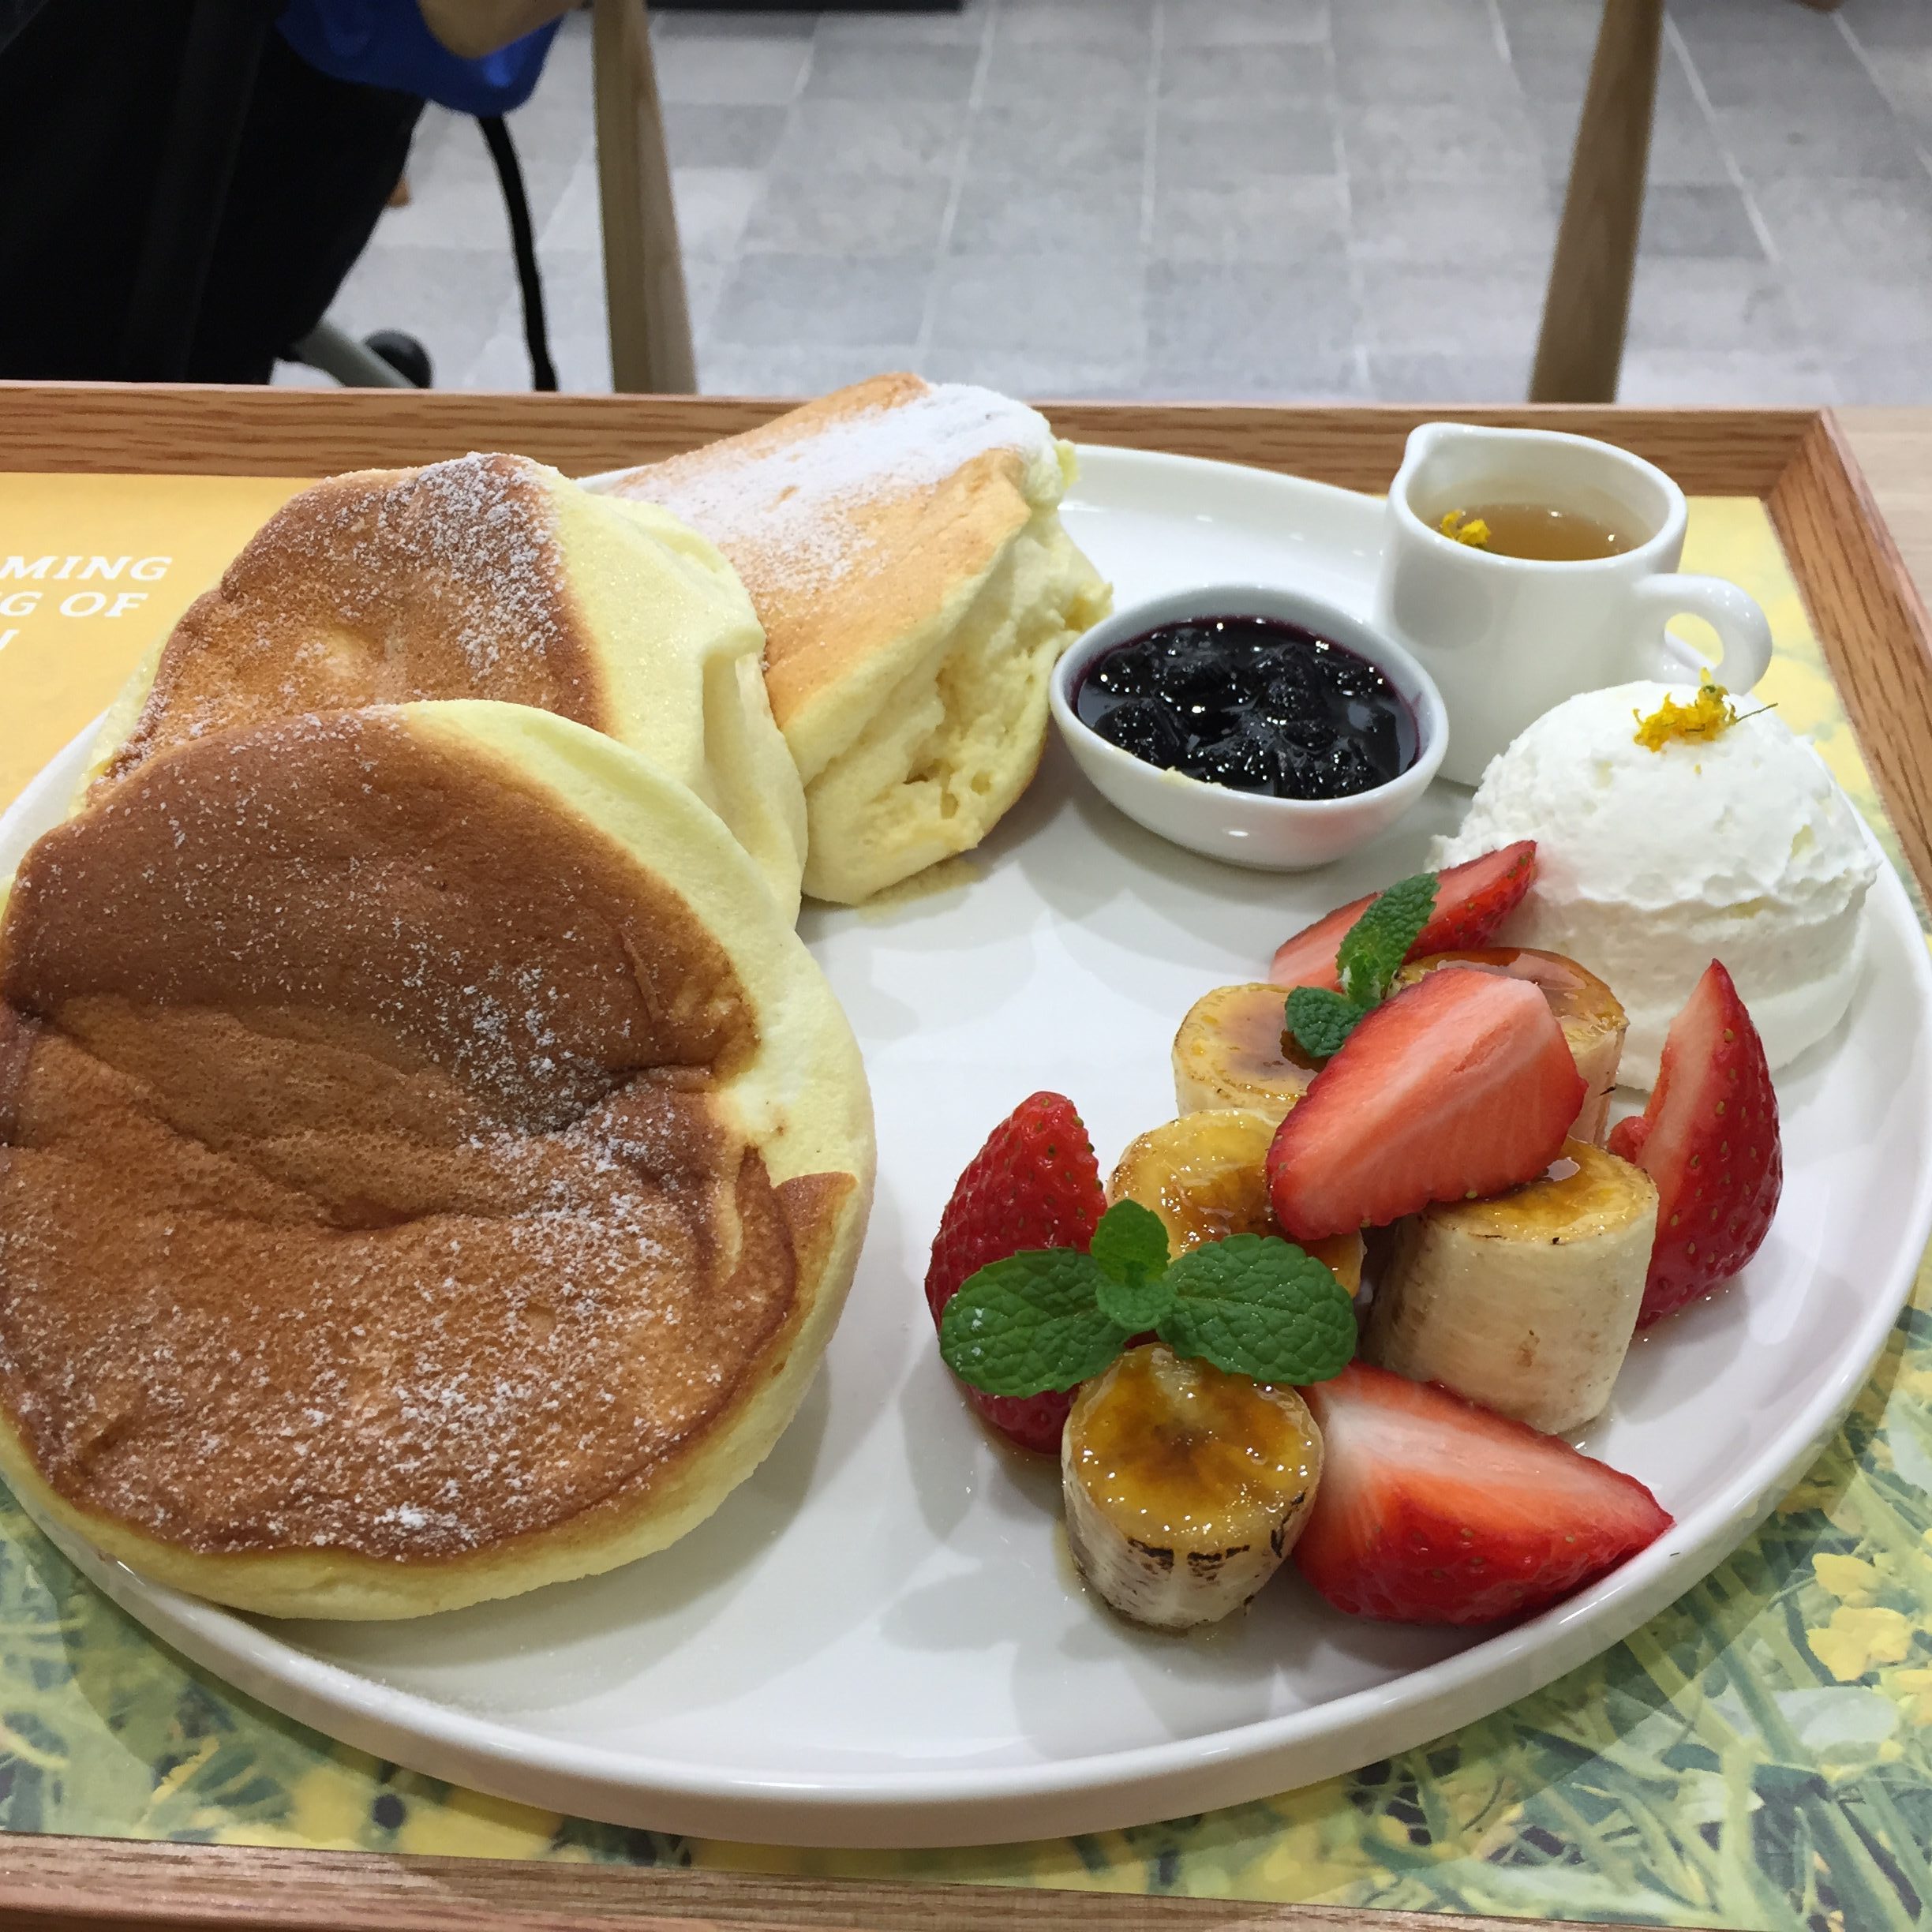 Dreaming in reality - Souffle Pancake at Innesfree, Myeong-dong.